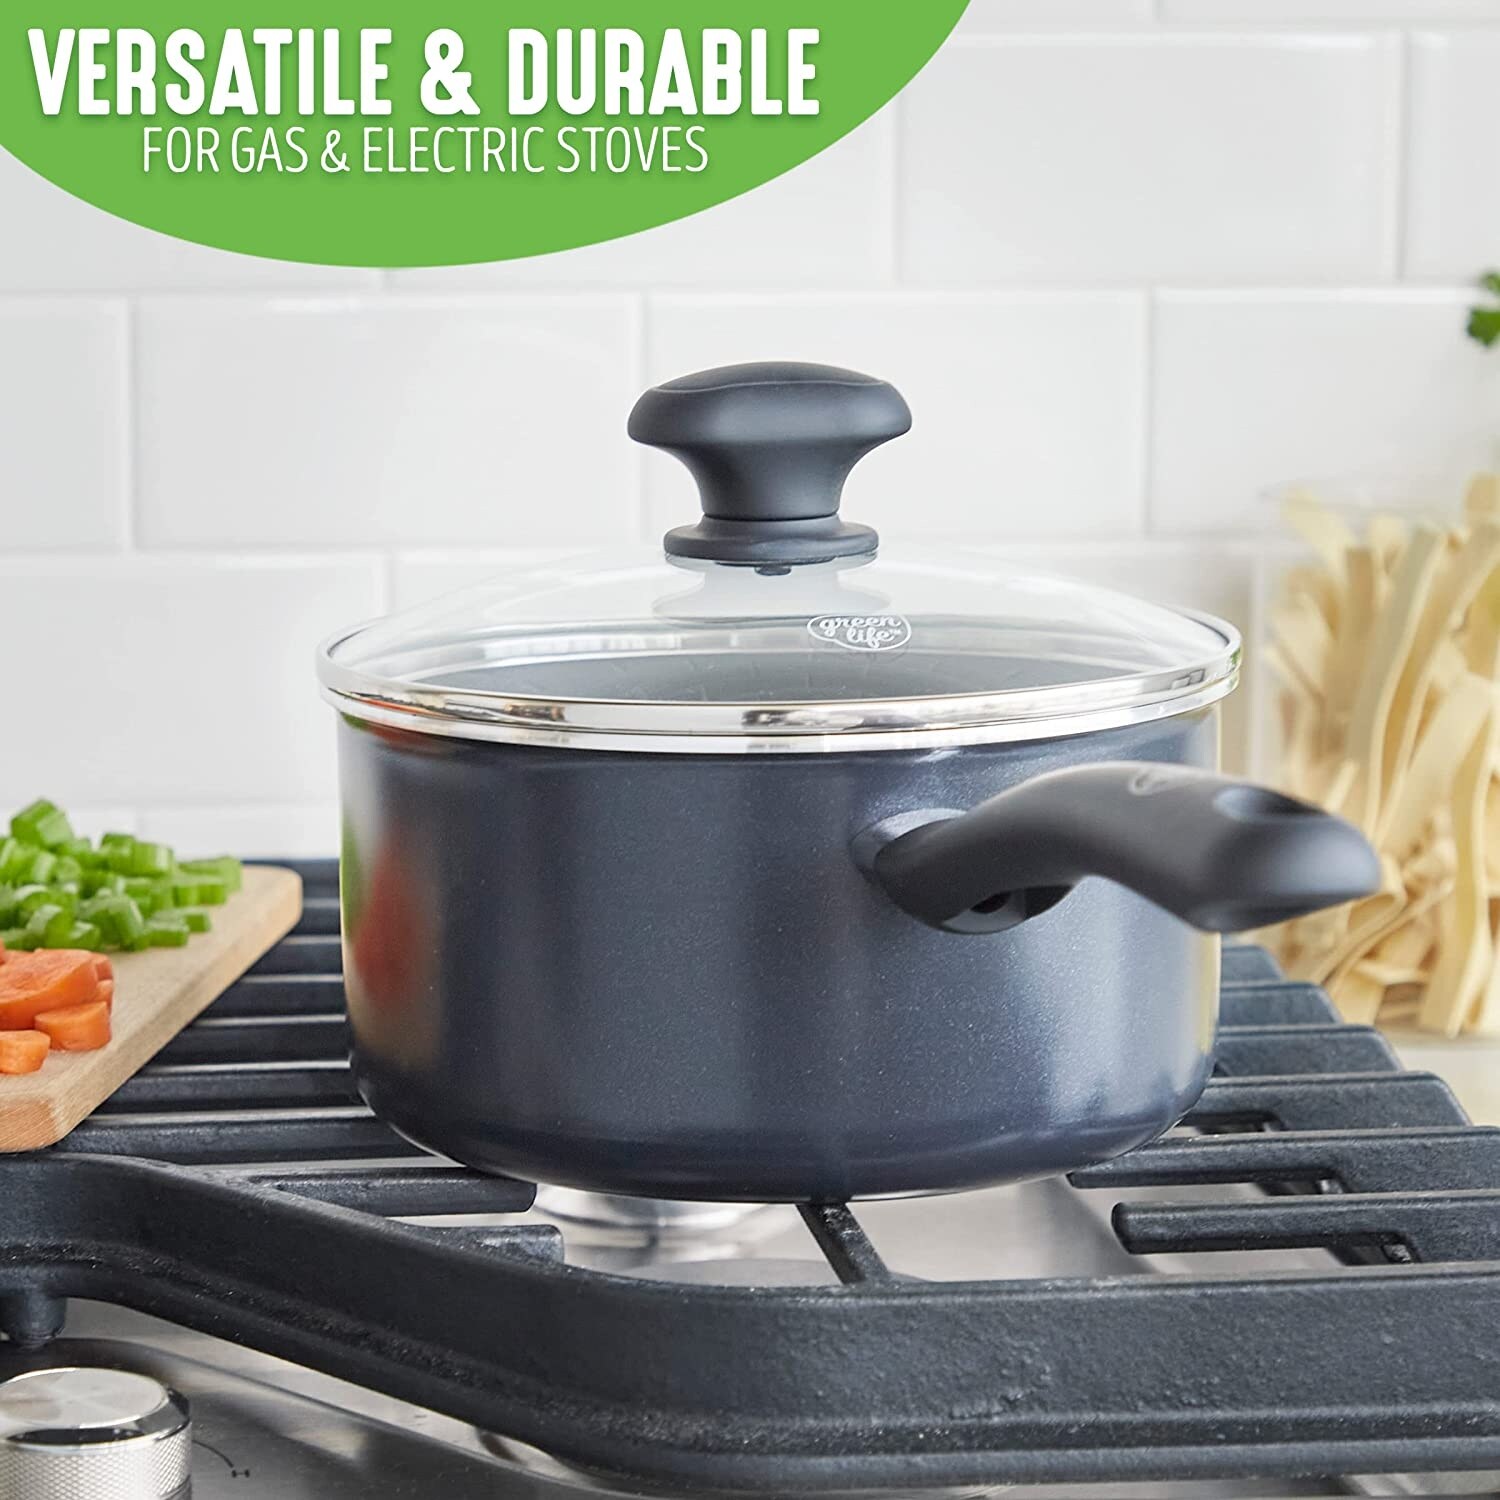 Greenlife Diamond Healthy Ceramic Nonstick, Cookware Pots And Pans